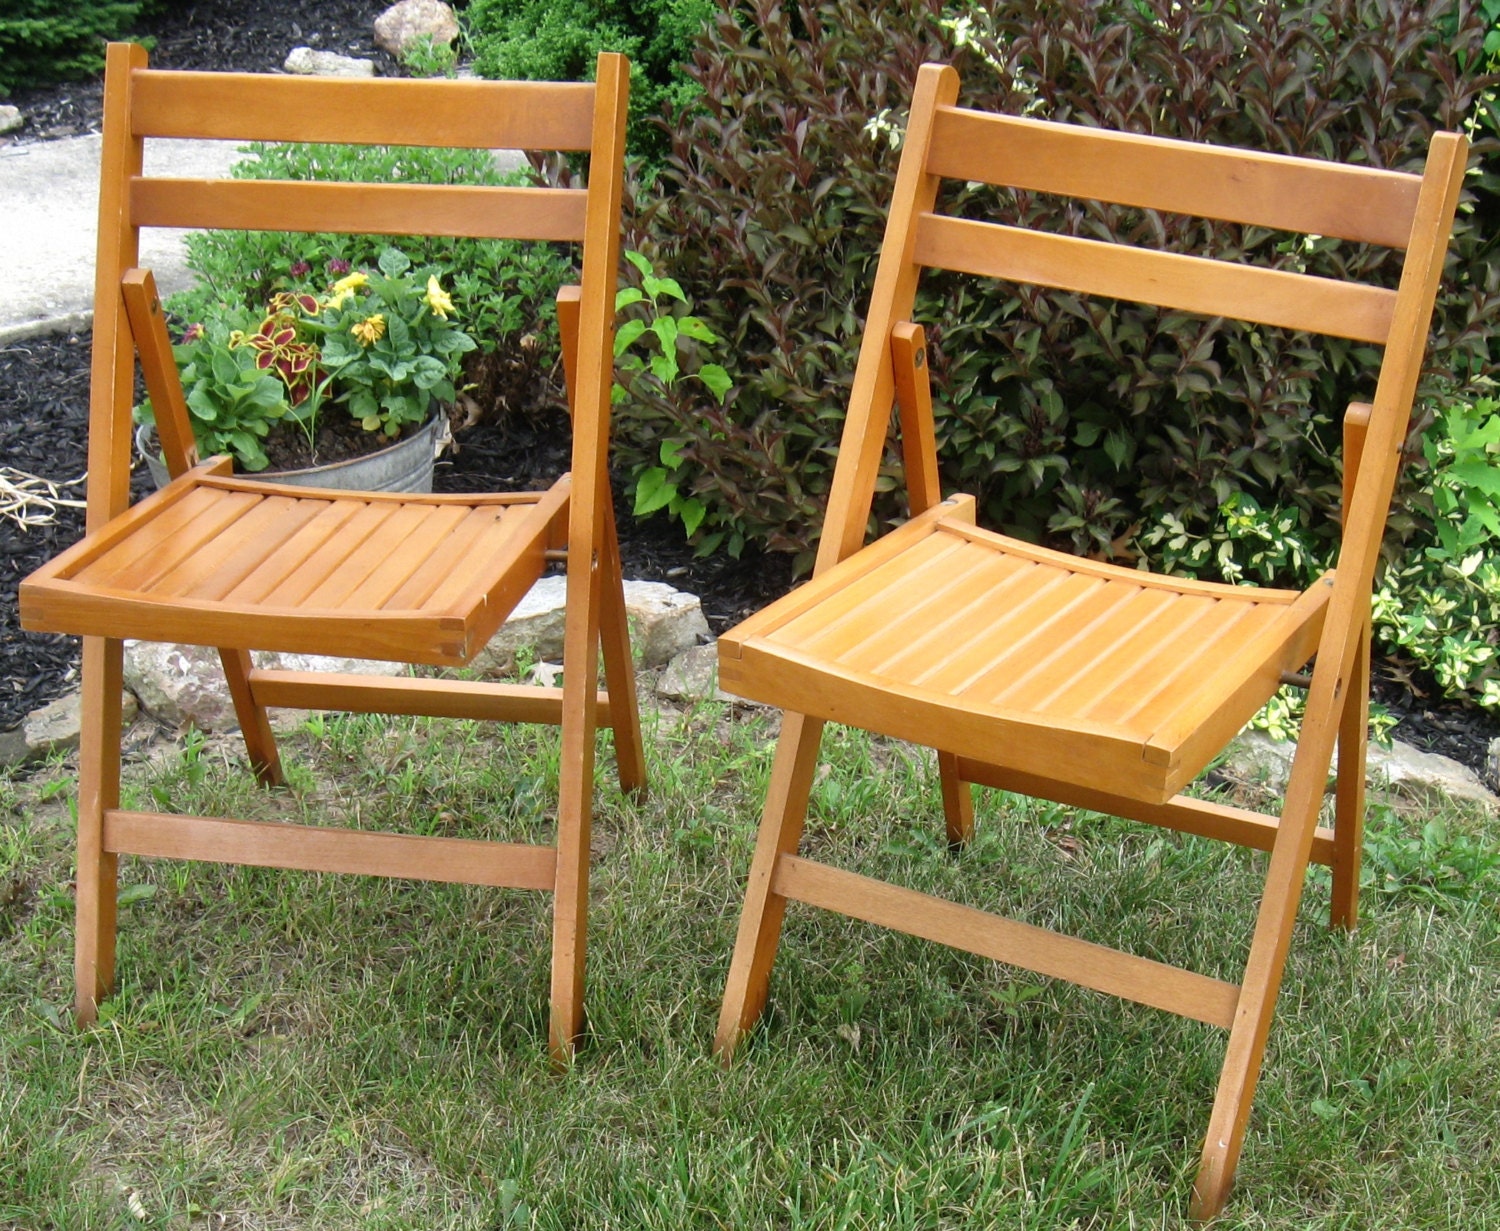 Pair of Vintage Folding Wooden Deck Chairs made in Romania, Original